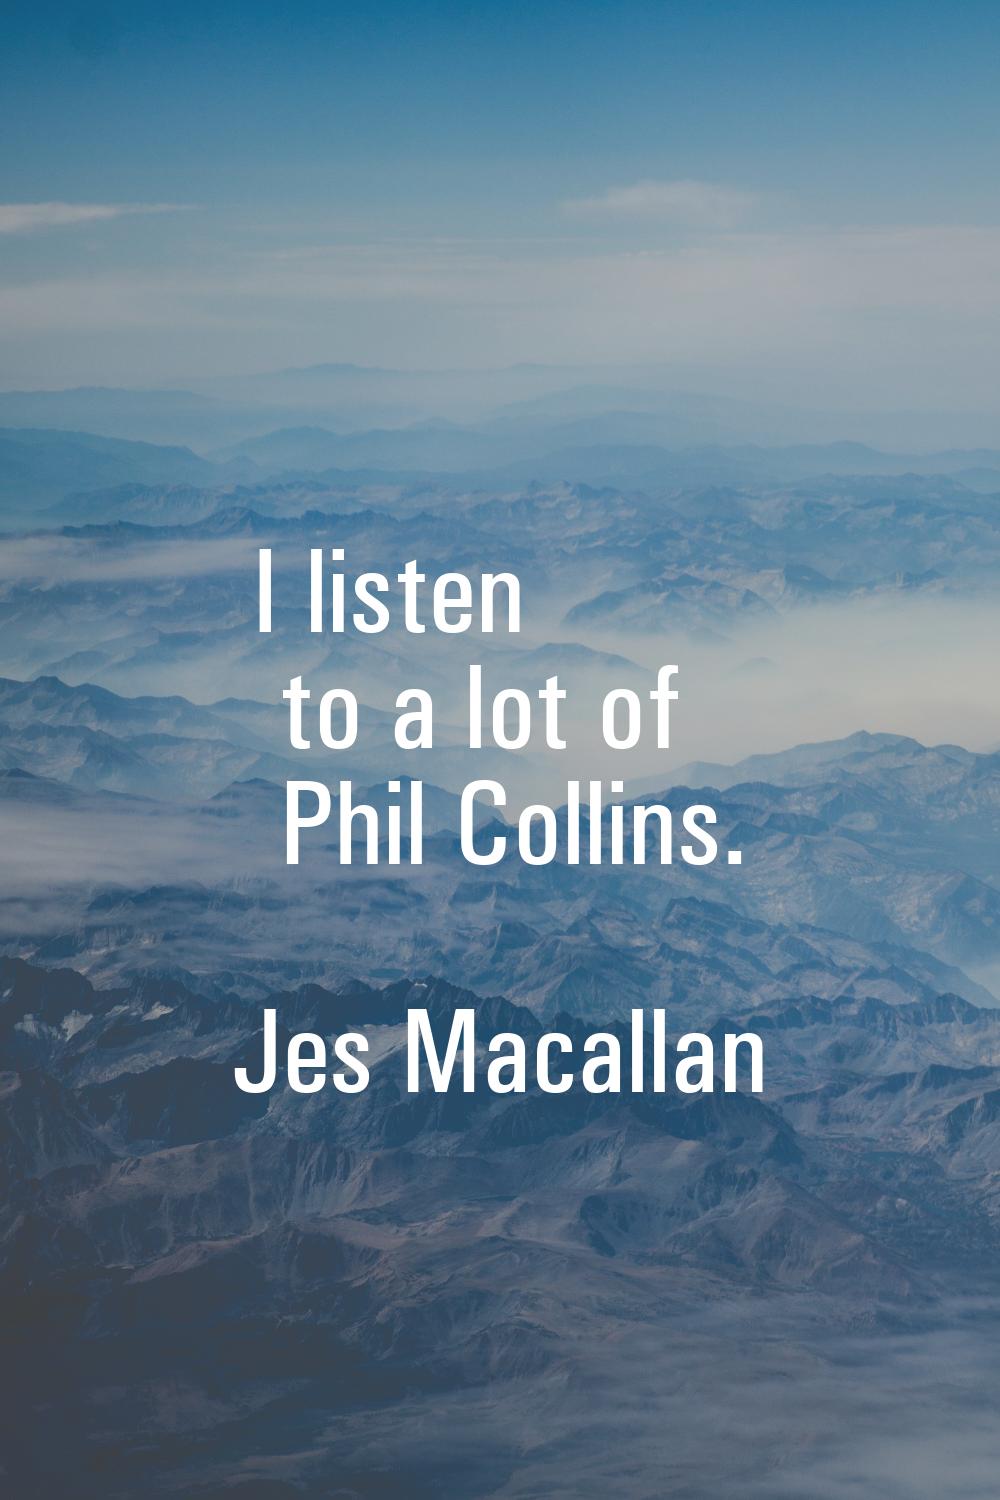 I listen to a lot of Phil Collins.